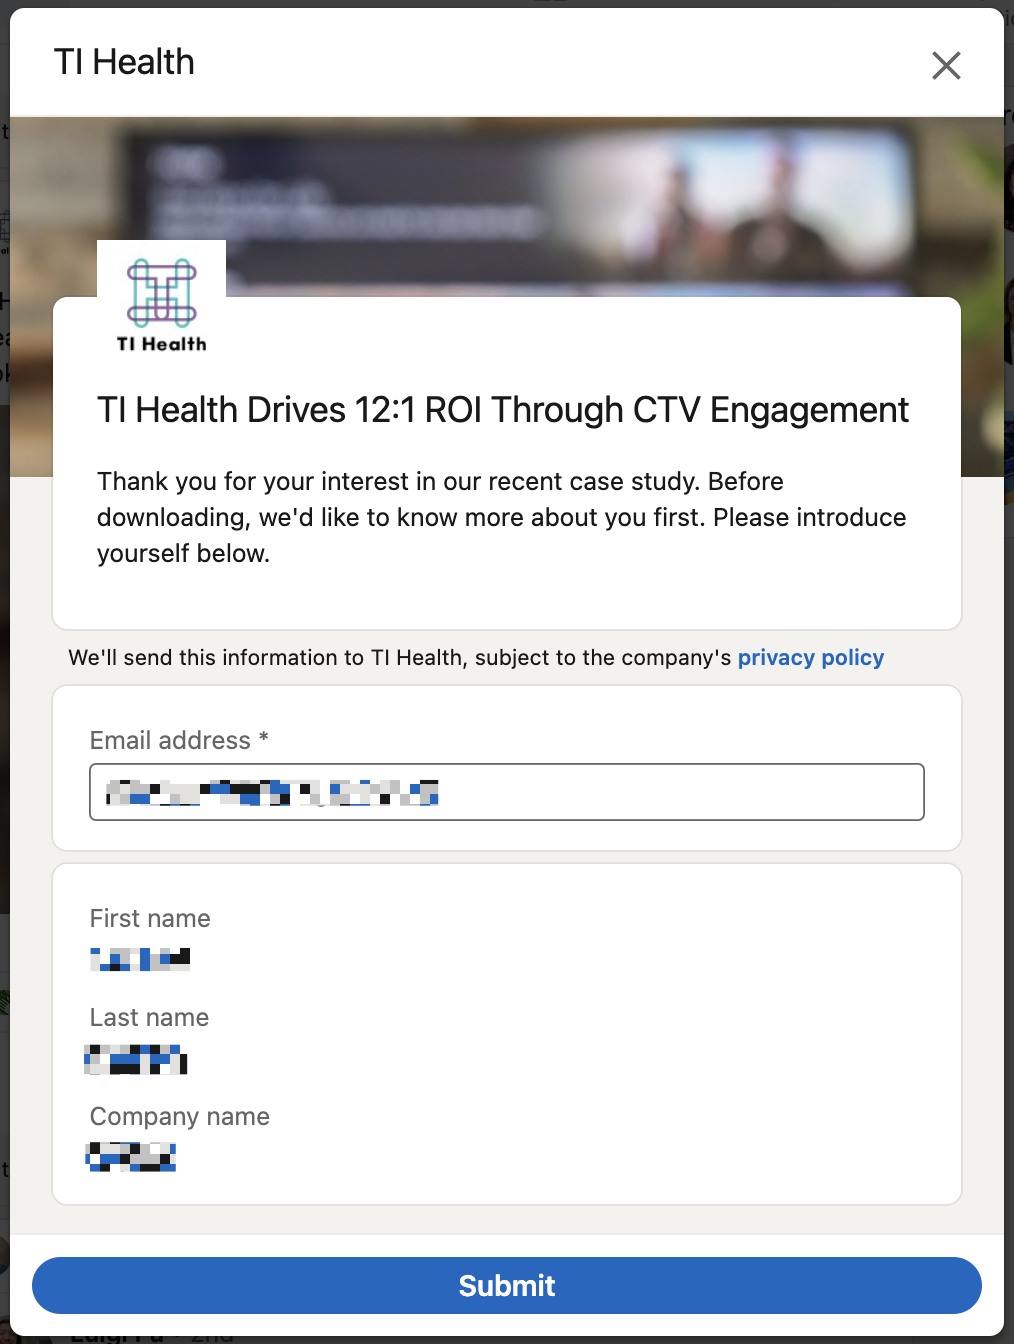 LinkedIn Lead Gen Form example from TI Health, with human-sounding language on the form